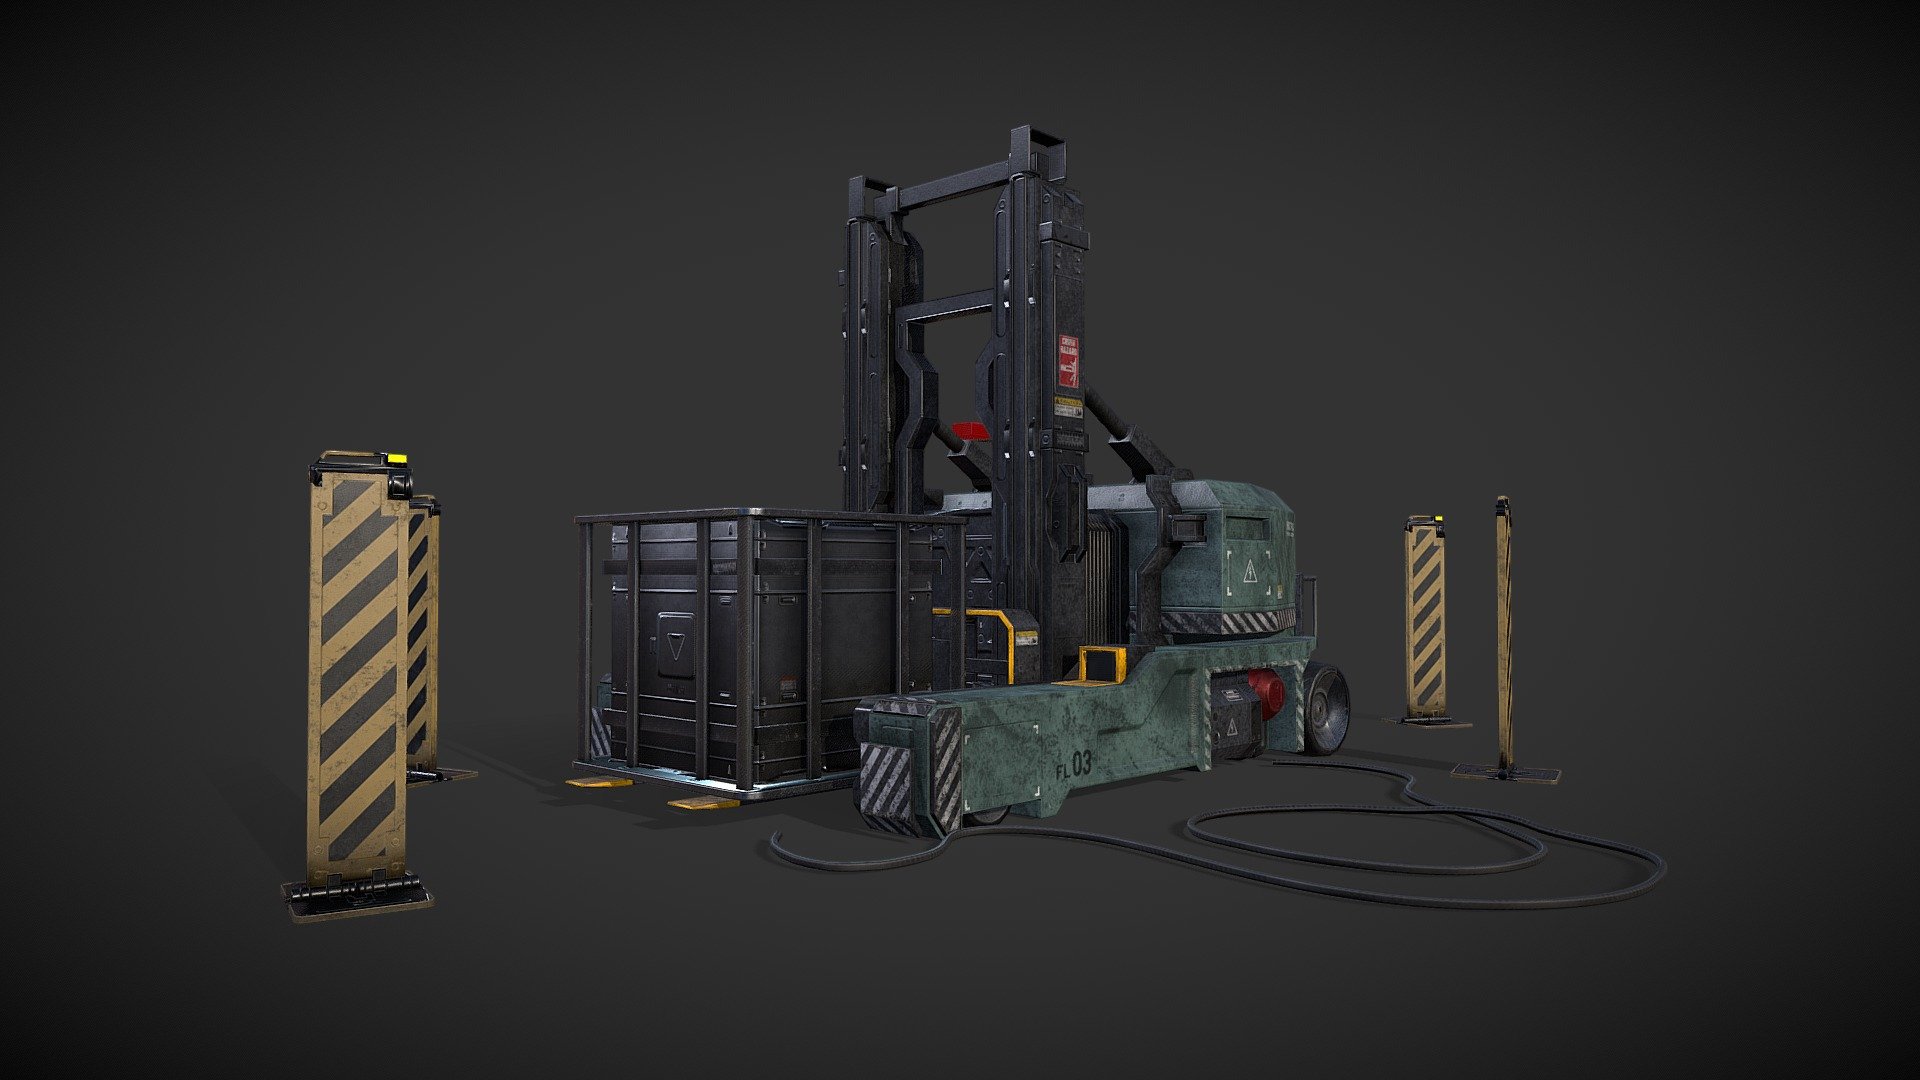 Project done in my free time. Fan Art of the Forklift asset from Star Citizen. 
Hope you enjoy ! - Star Citizen Forklift Fan Art - Game Asset - 3D model by Maël Briffa (@briffamael) 3d model